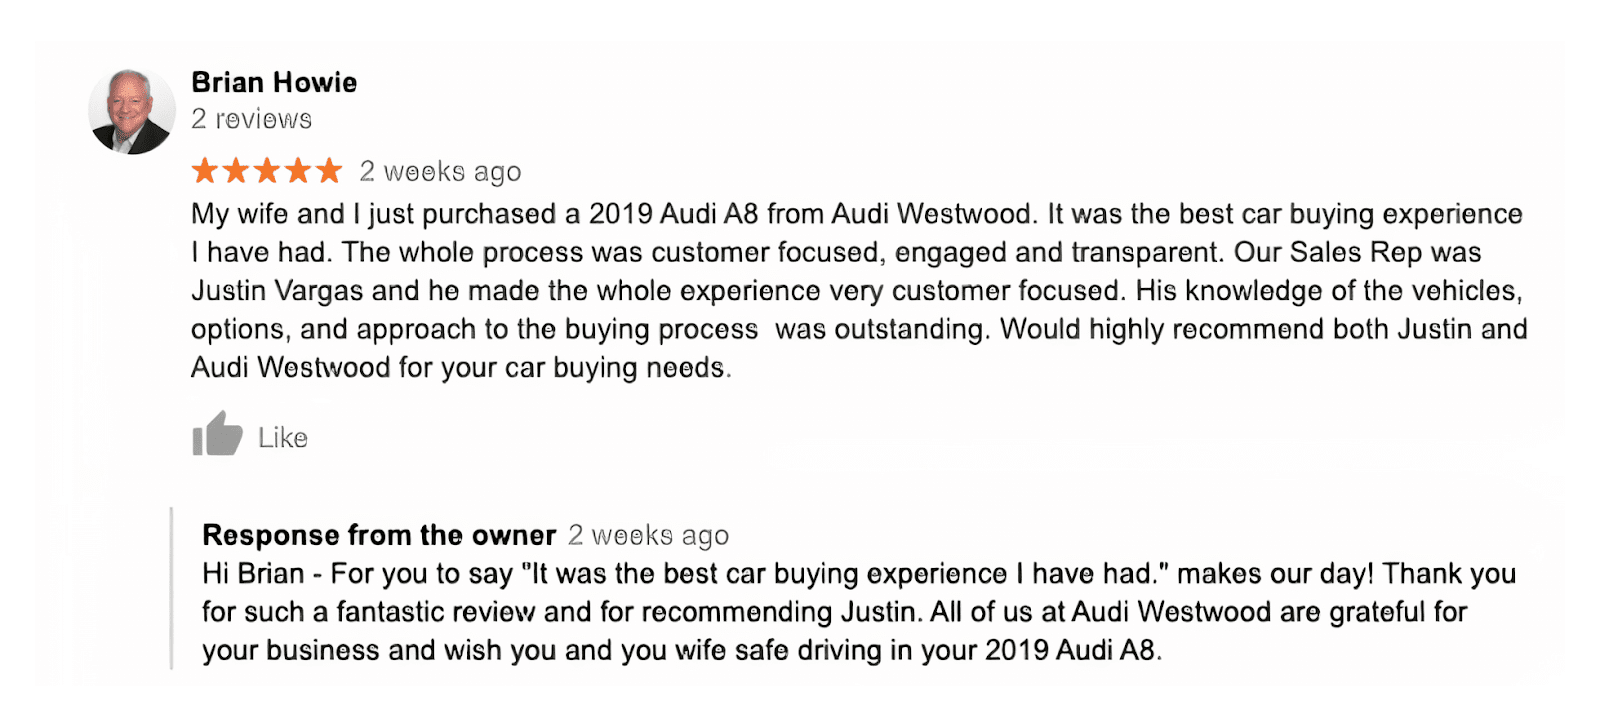 an example response to a glowing 5-star review on google my business. the response thanks the customer for their positive feedback and expresses gratitude for their patronage. 